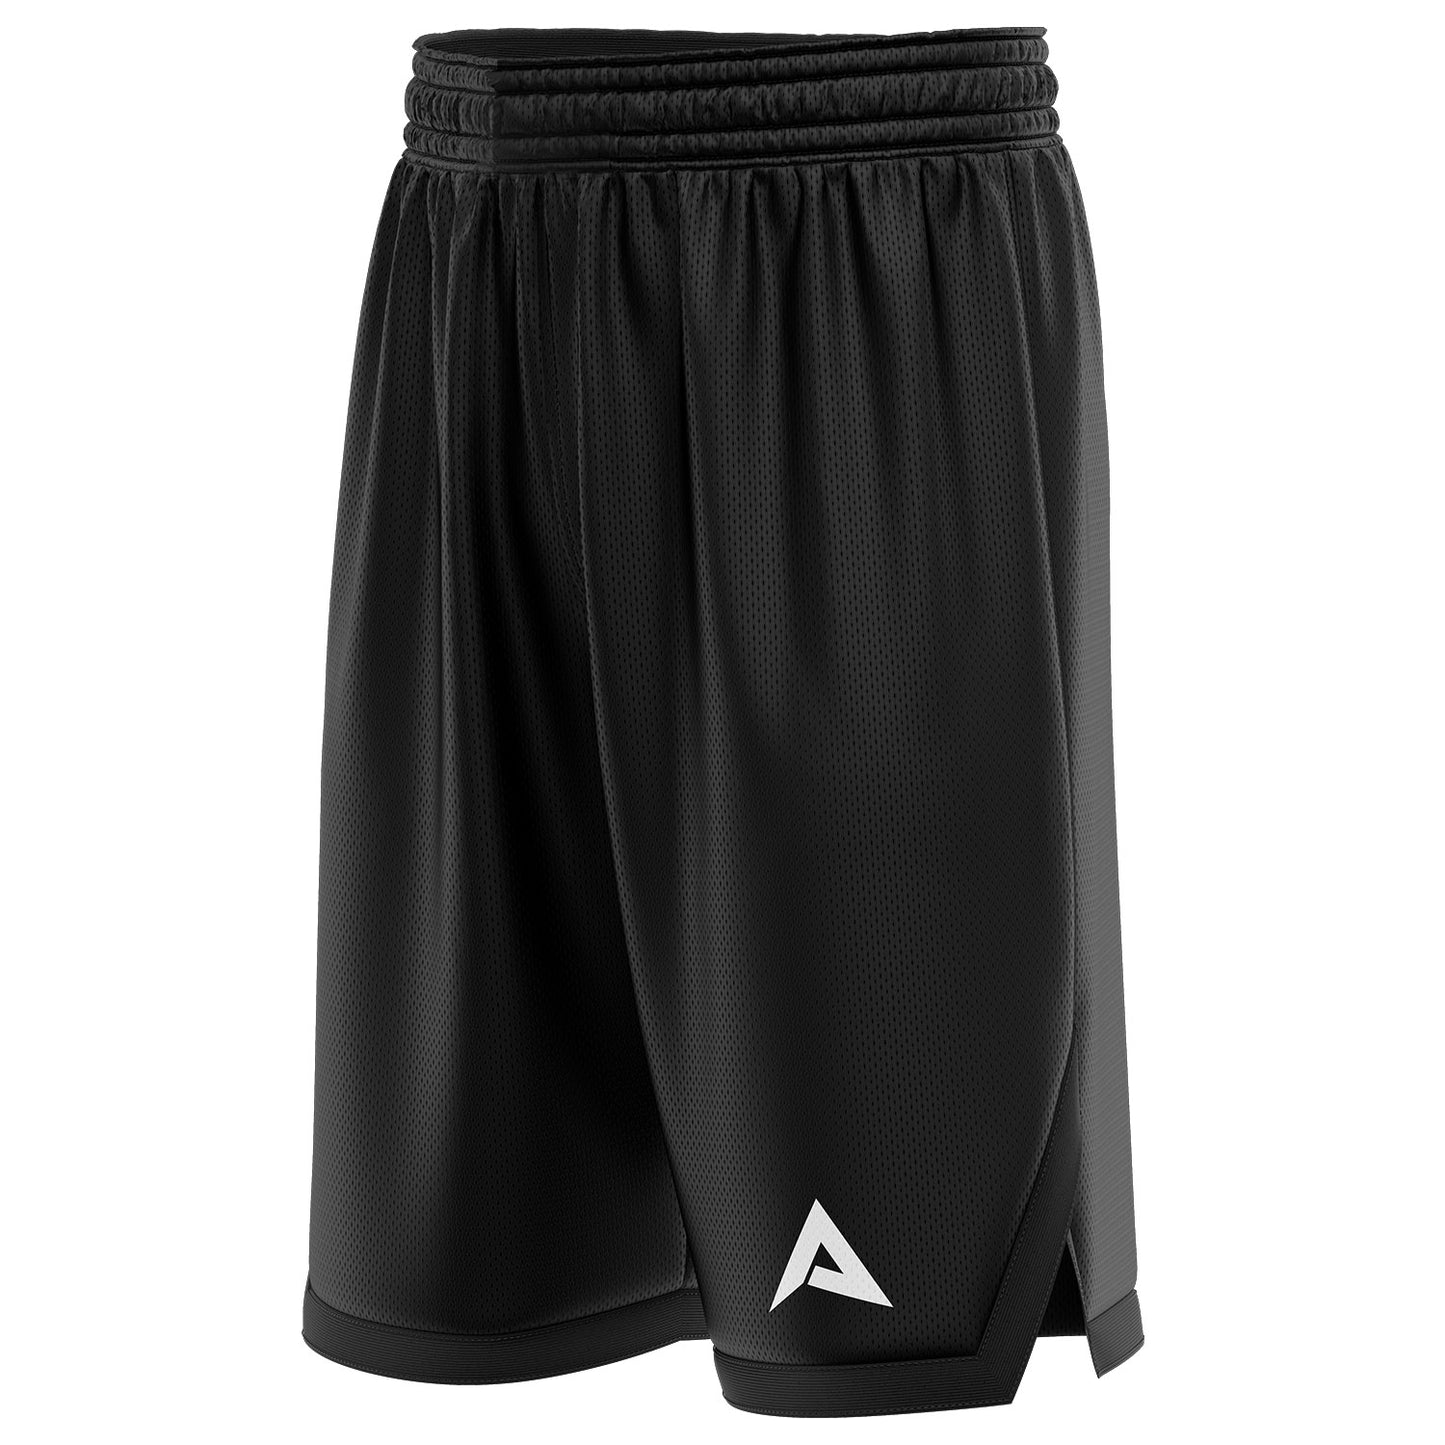 Conquer Vent Max Anarchy Shorts - Black/White (New Logo)